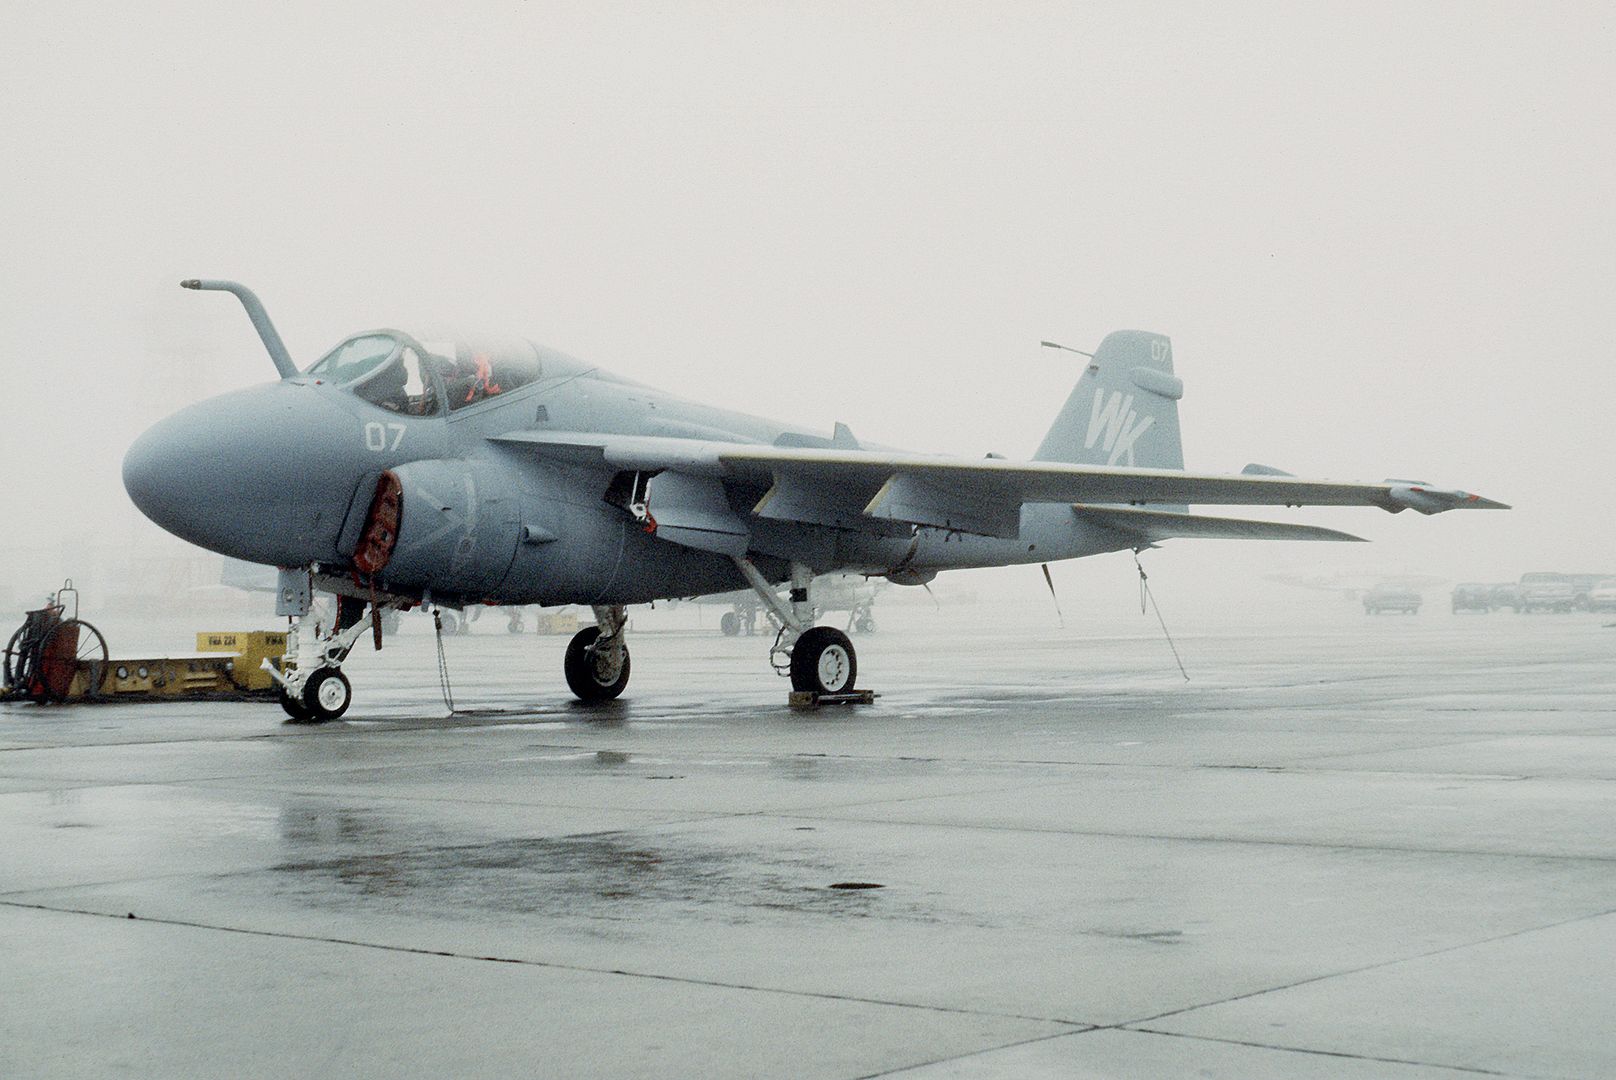 A 6 Intruder Aircraft From The Marine All Weather Medium Attack Squadron 224 Parked On The Flight Line